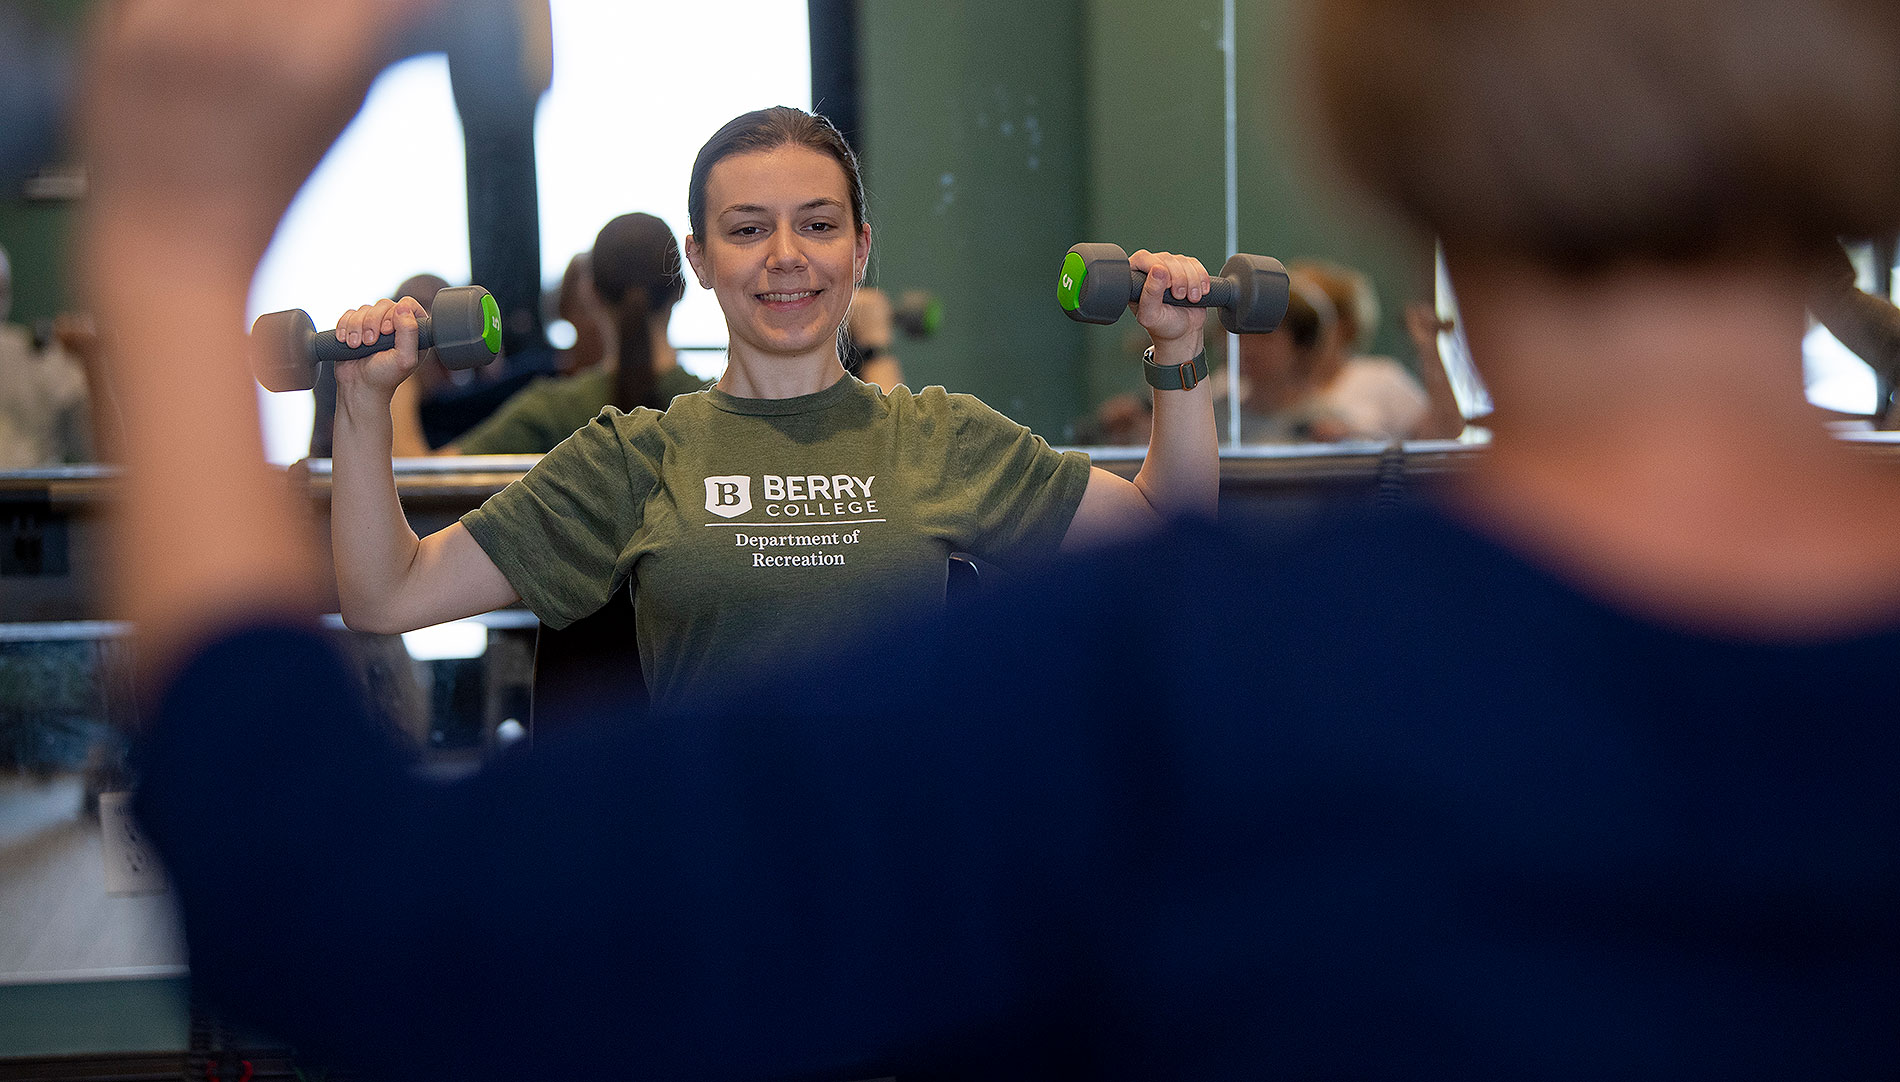             Exercise Science Student Tailors Major to Pursue Recreational Therapy      